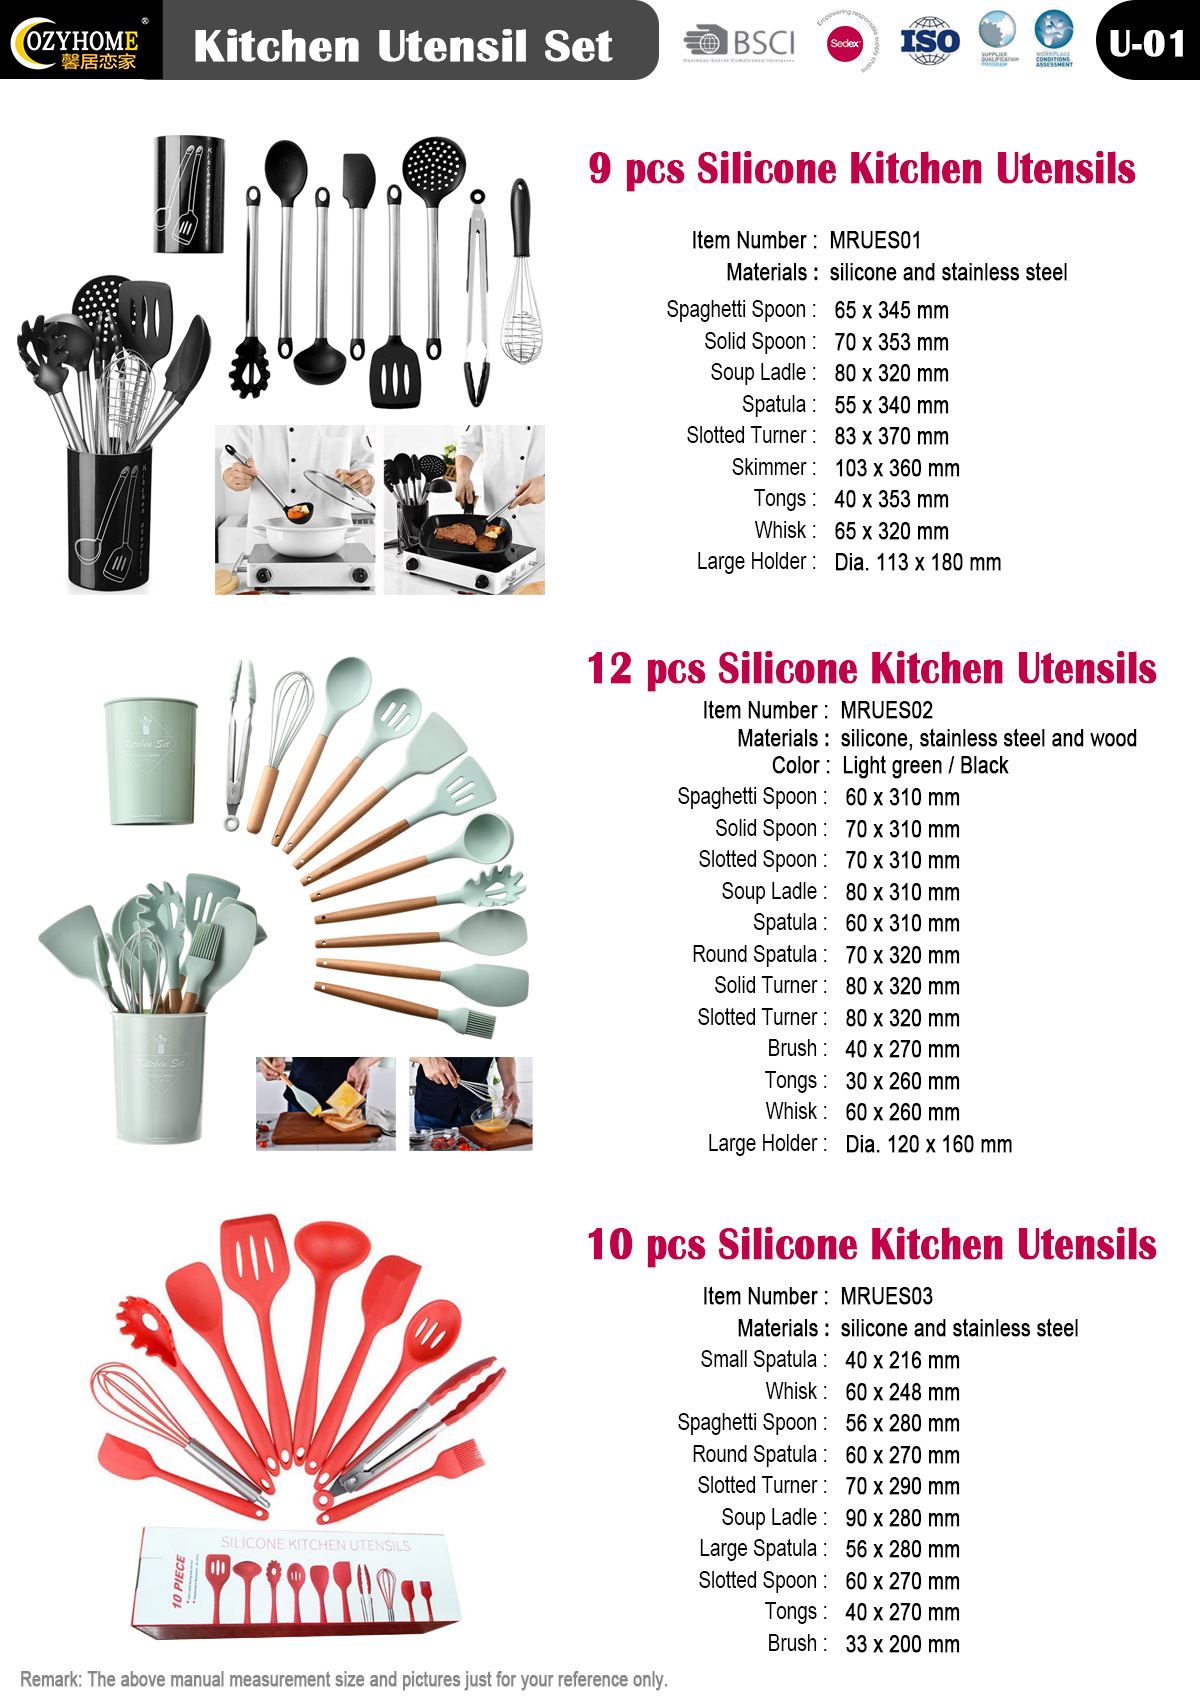 Silicone Kitchen Utensils 2019 Pages: 01